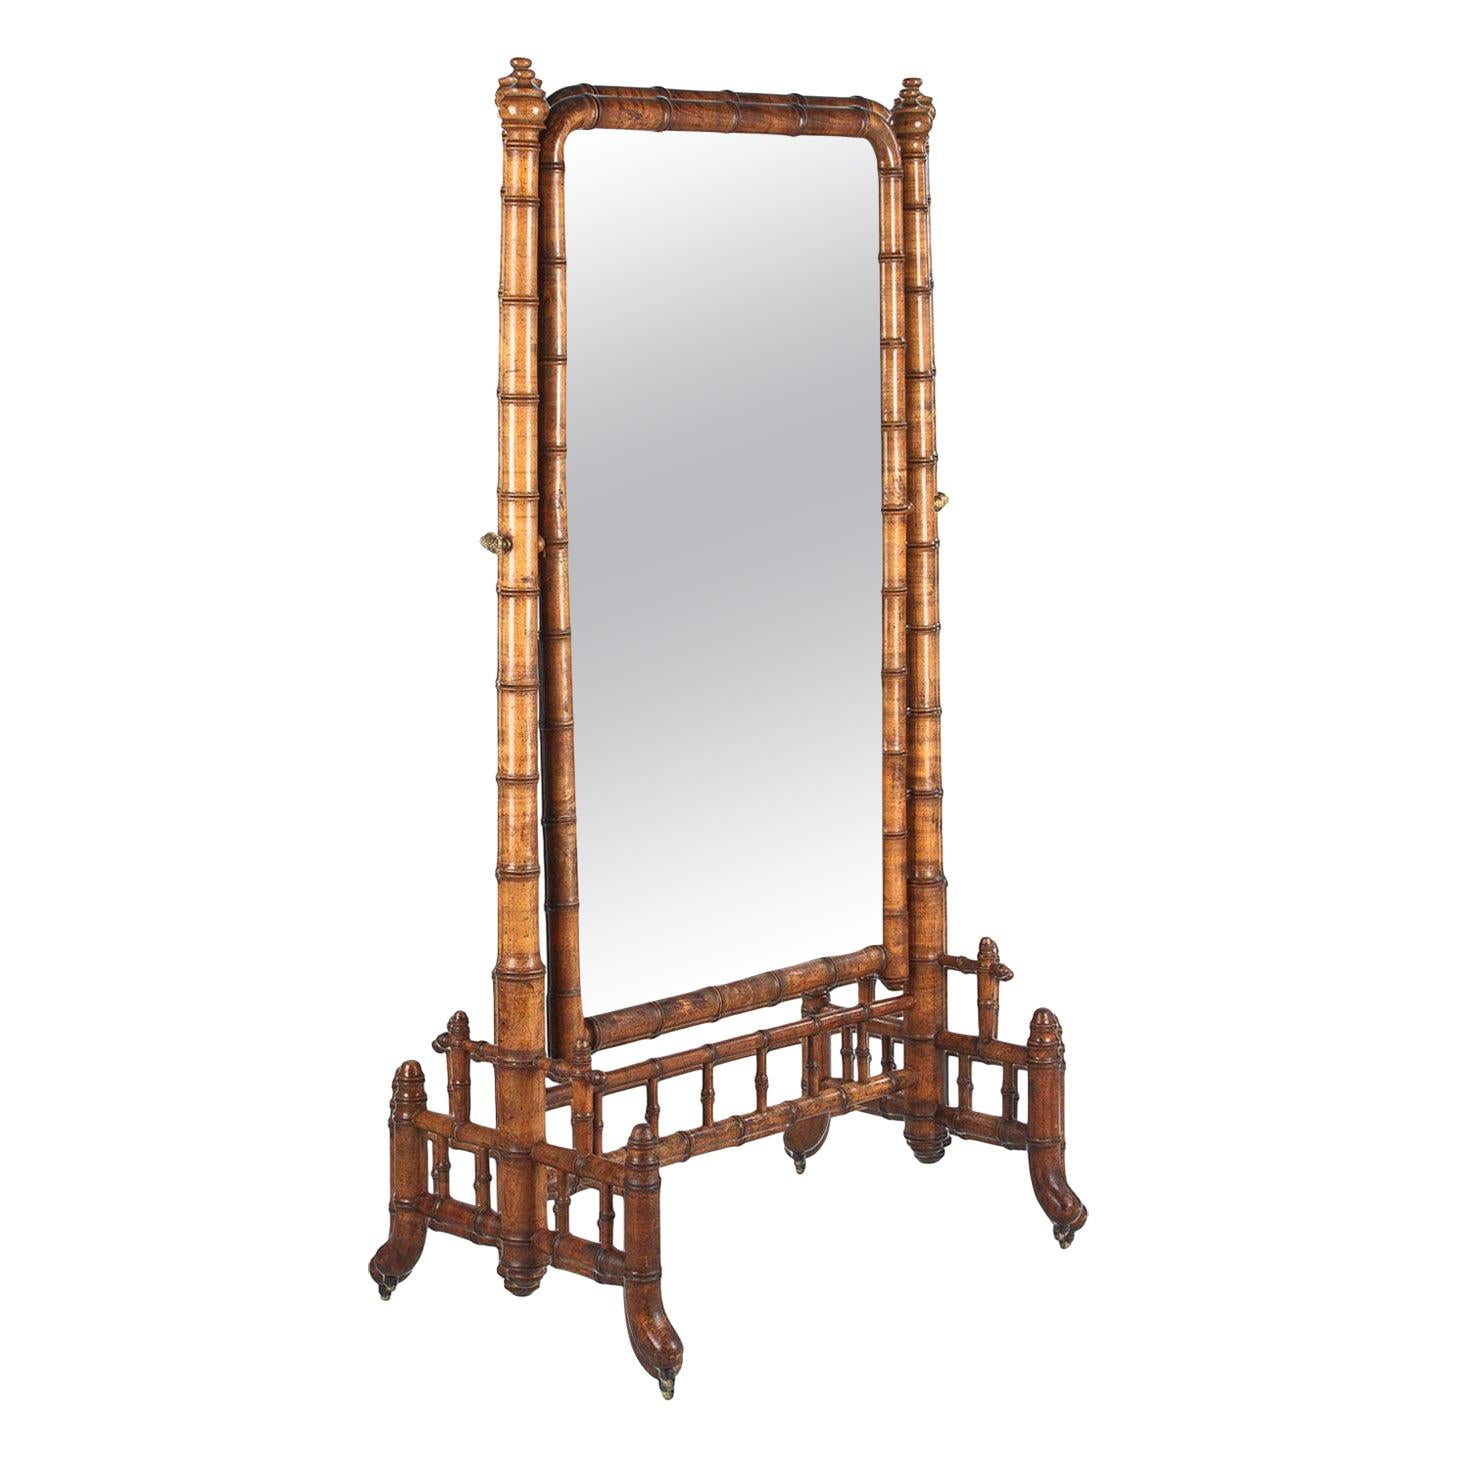 Napoleon III Faux-Bamboo Cheval Mirror, France, Late 1800s